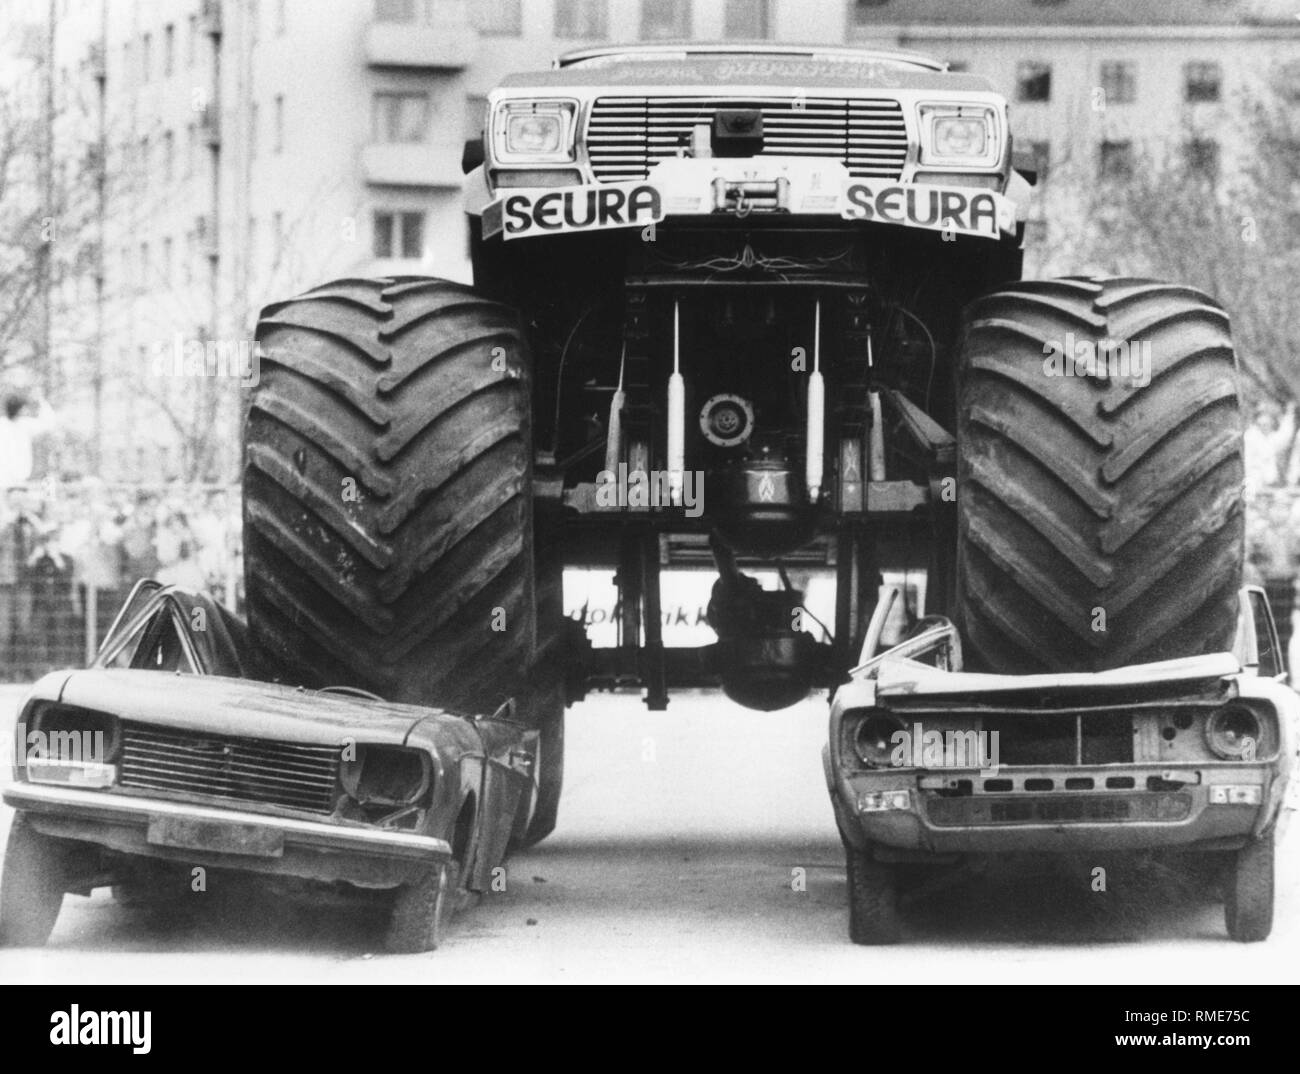 A monster truck in Helsinki drives over two car bodies. On the left, a Peugeot 504 Stock Photo